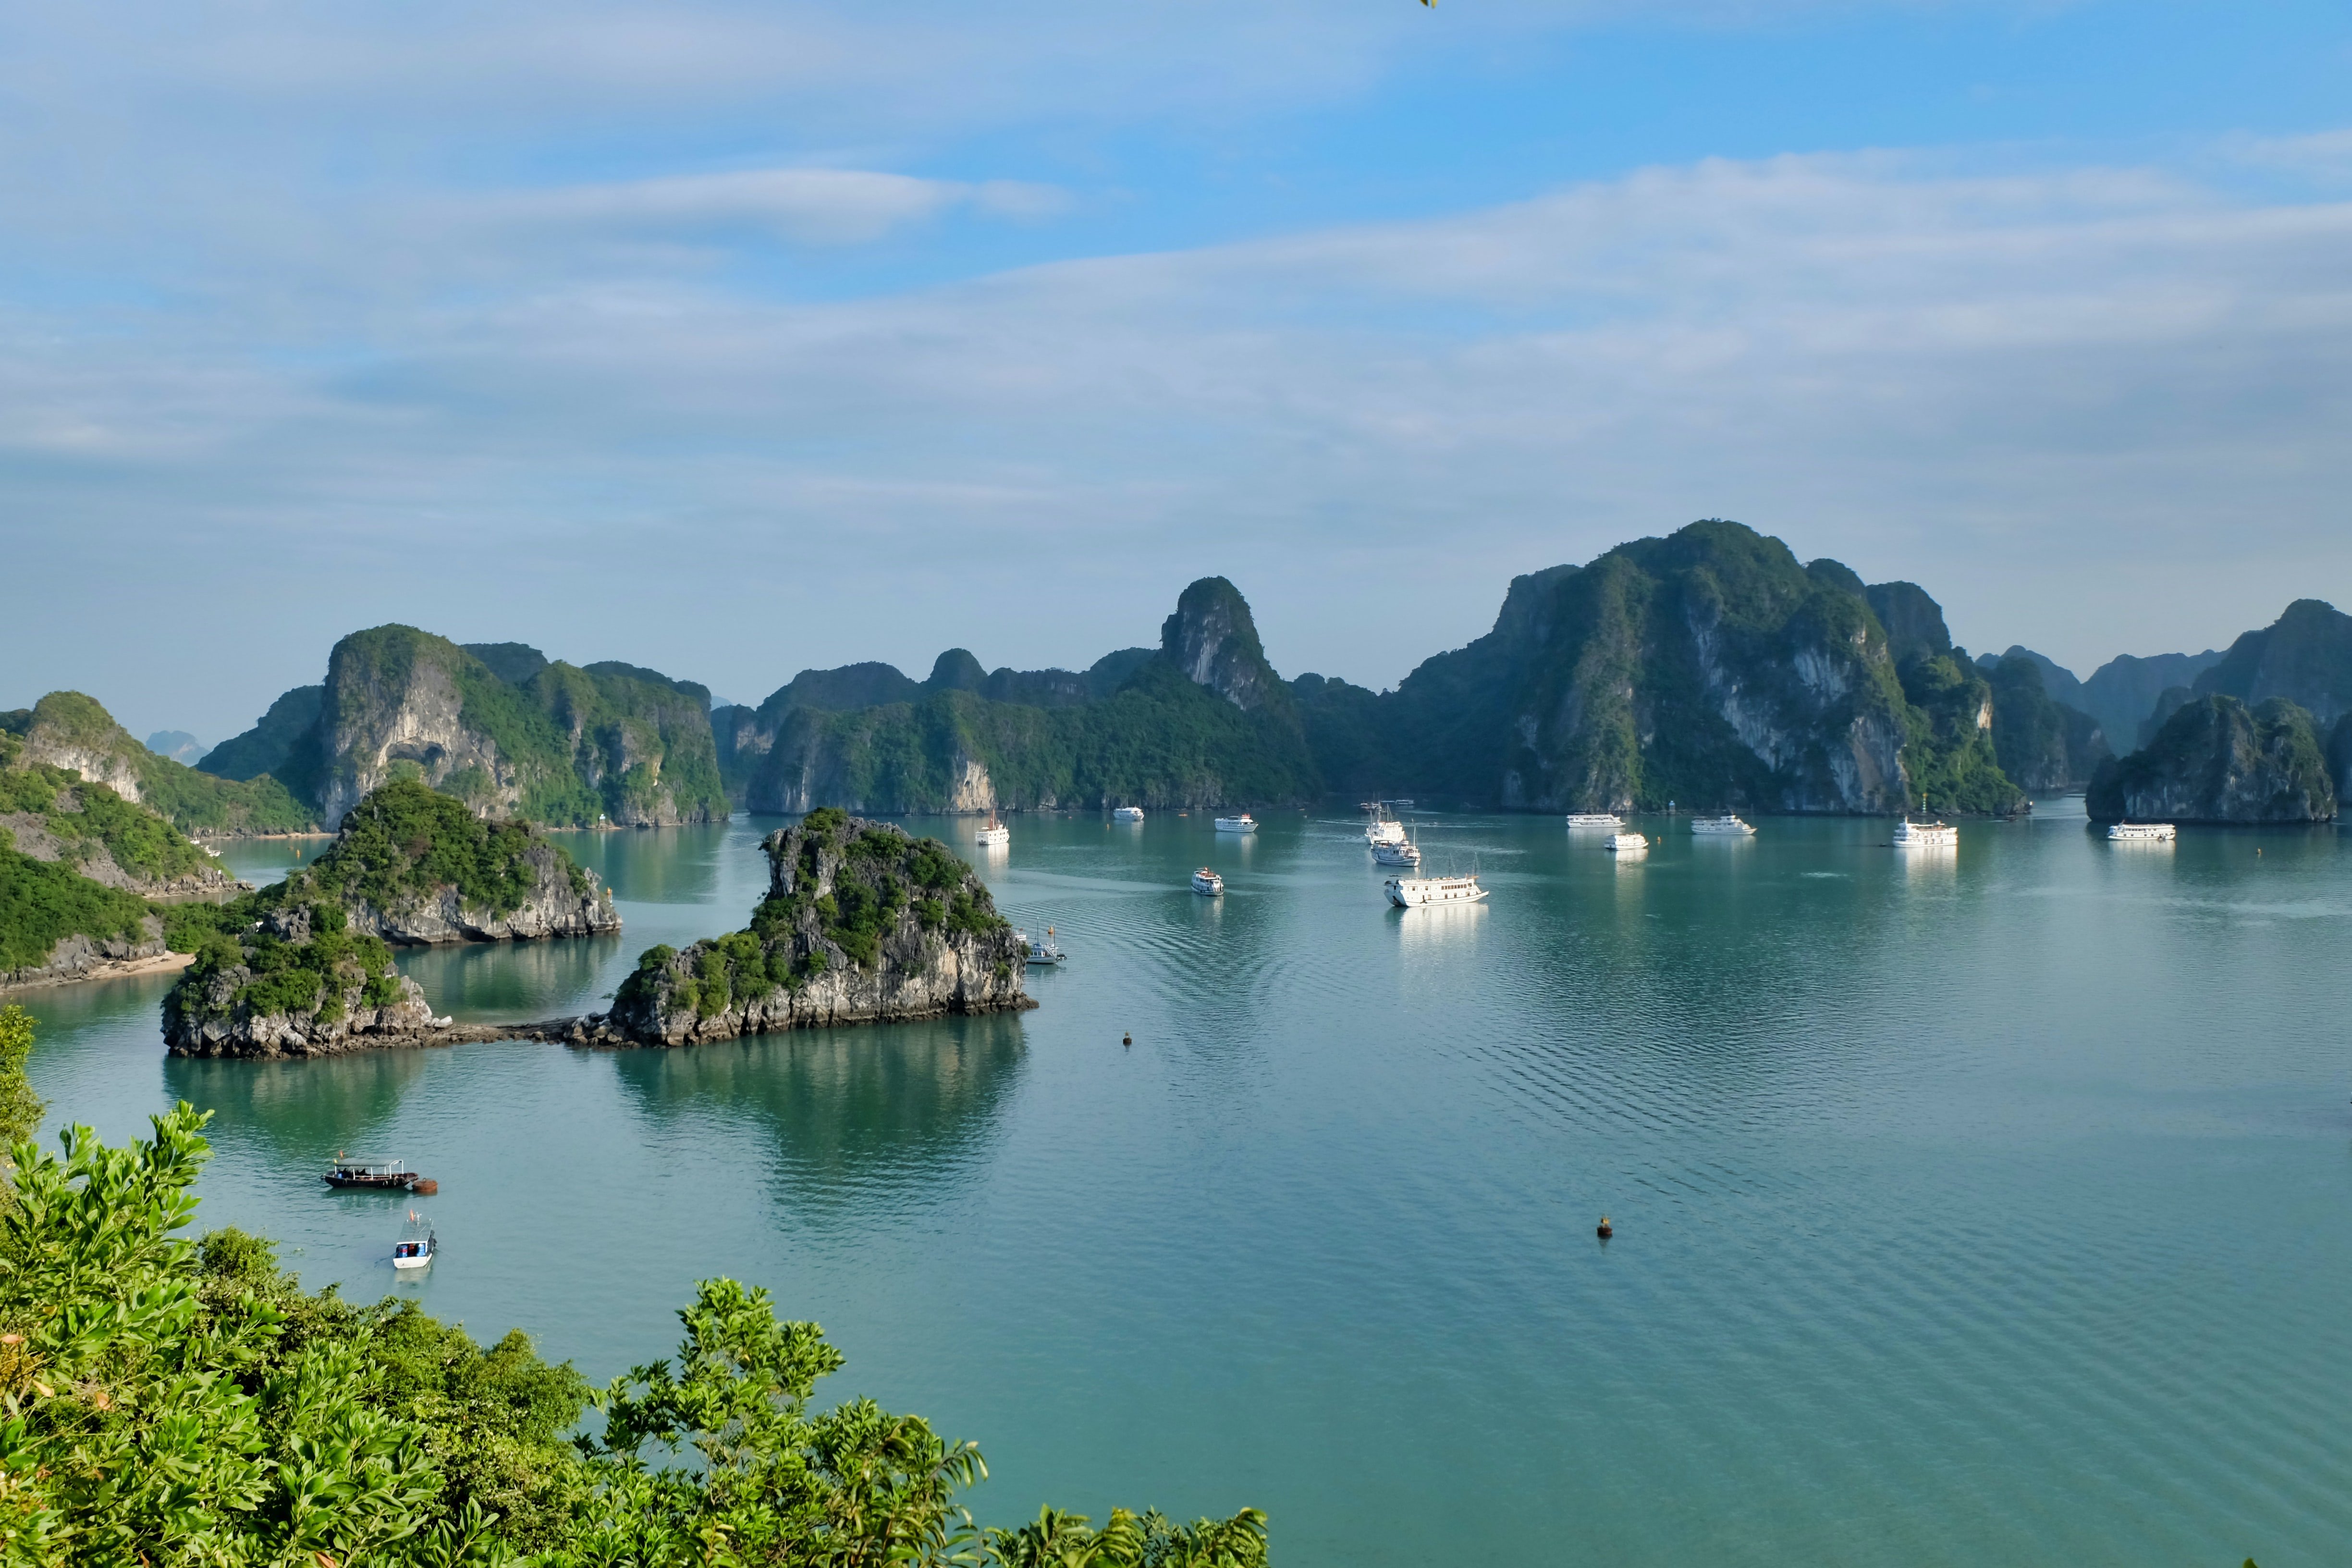 A view of Halong Bay, Vietnam with ships in the blue water and high cliffs.